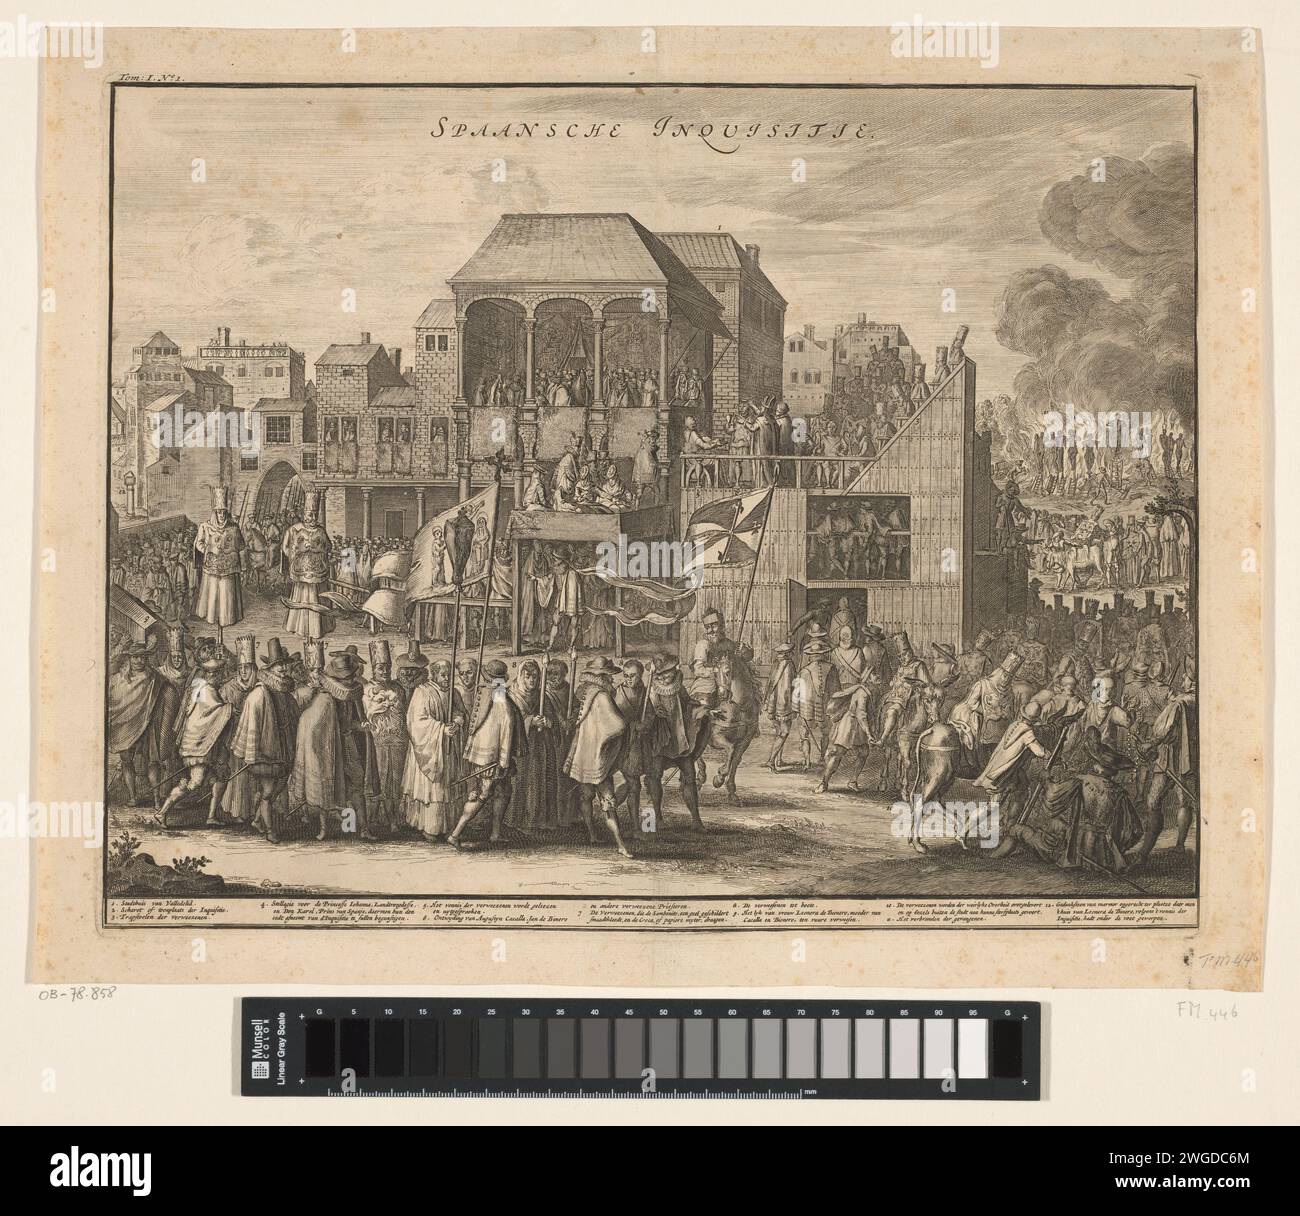 Auto-d-Fe in Valladolid, 1558, 1701-1703 print Auto-Da-Fe (Autodafe) in Valladolid, 21 May 1558. Procession of around thirty Protestants convicted by the Spanish Inquisition to a place outside the city where they are burned at the stake. In the middle a building with dignitaries, a wooden grandstand on the right on which the heretics are convicted. The convicted people wear special headgear (Capirote) and mantle with a performance of the Hellemond. In caption De Legenda 1-12 in Dutch. Northern Netherlands paper etching execution of heretic, e.g. by burning at the stake, 'auto-da-fé' Valladolid Stock Photo